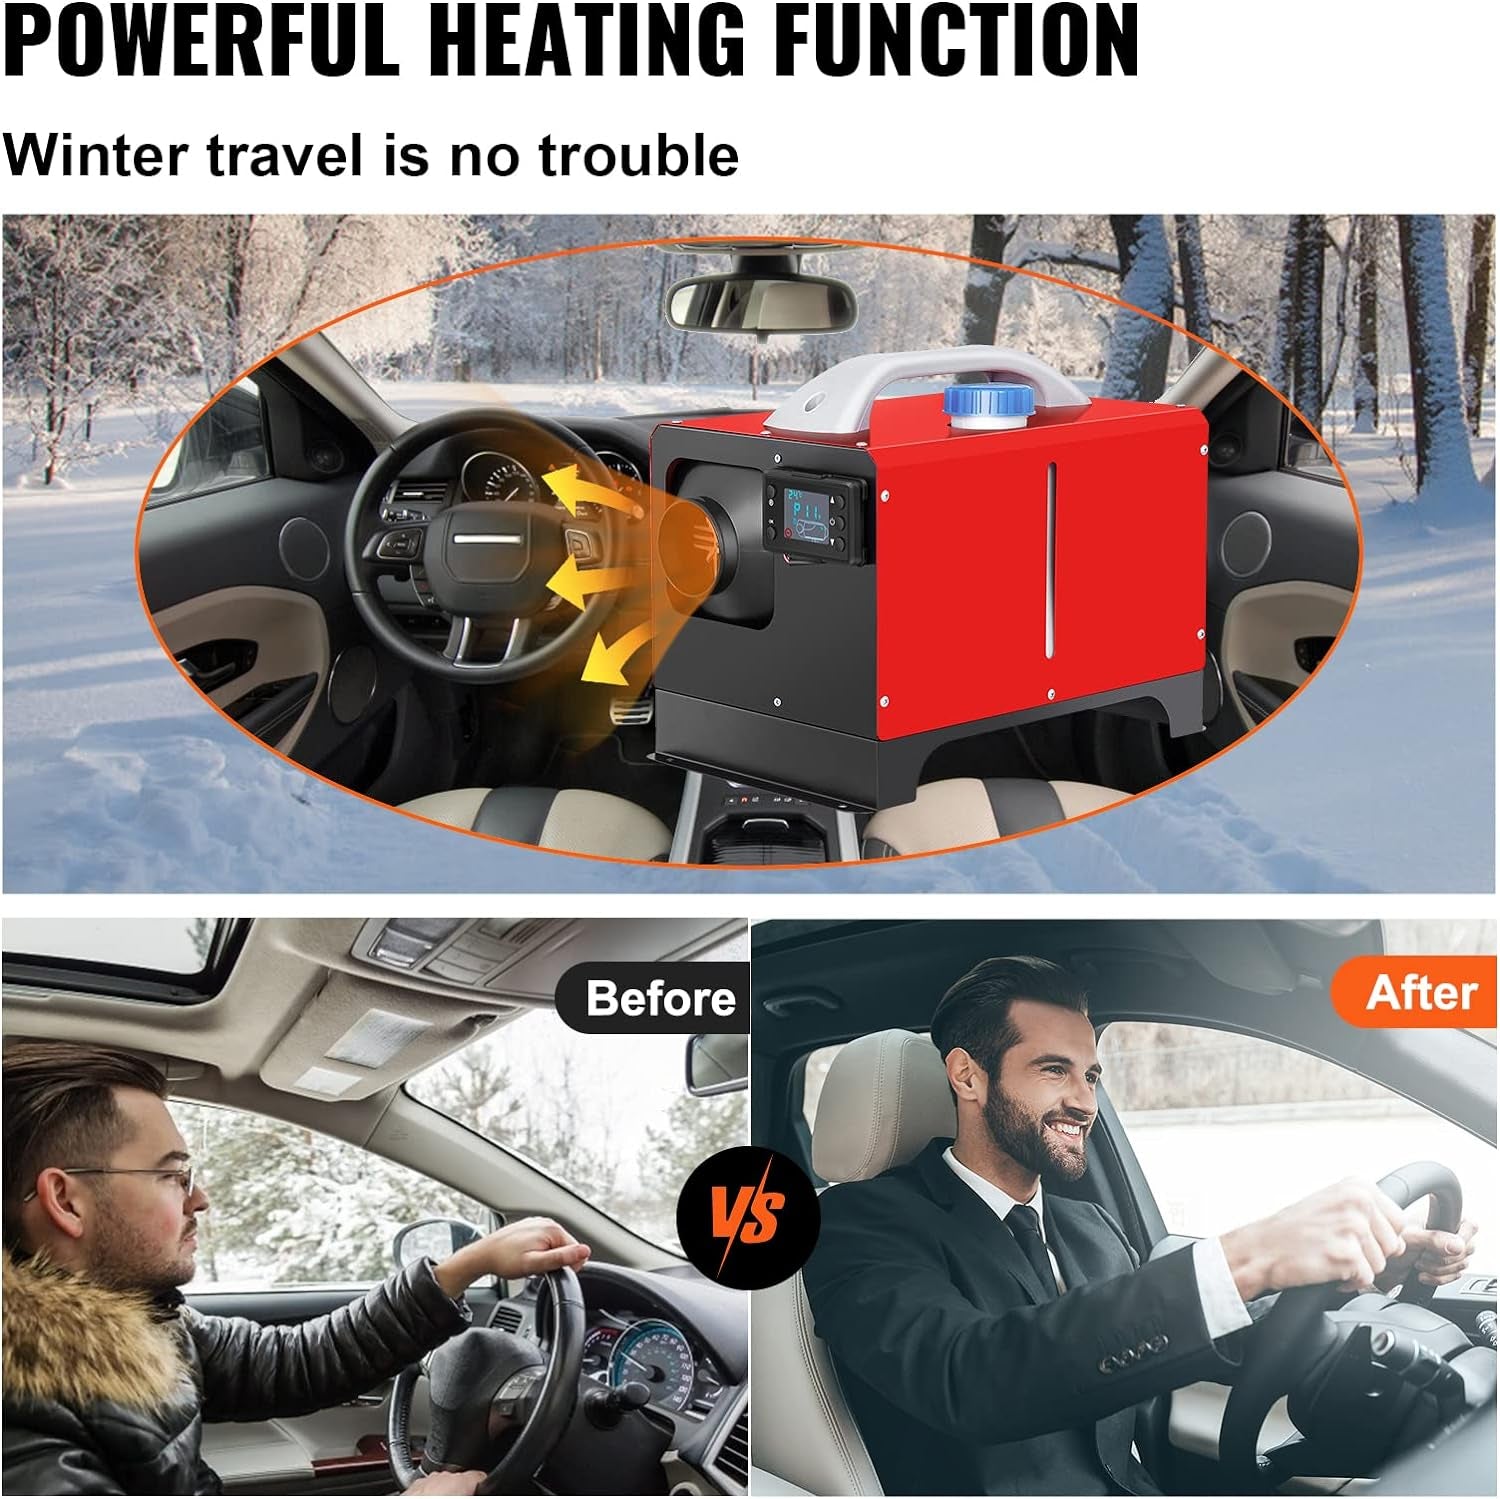 Diesel Air Heater, 5KW 12V Parking Heater, Mini Truck Heater, Single Outlet Hole, with Black LCD, Remote Control, Fast Heating Diesel Heater, for RV Truck, Boat, Bus, Car Trailer, Motorhomes